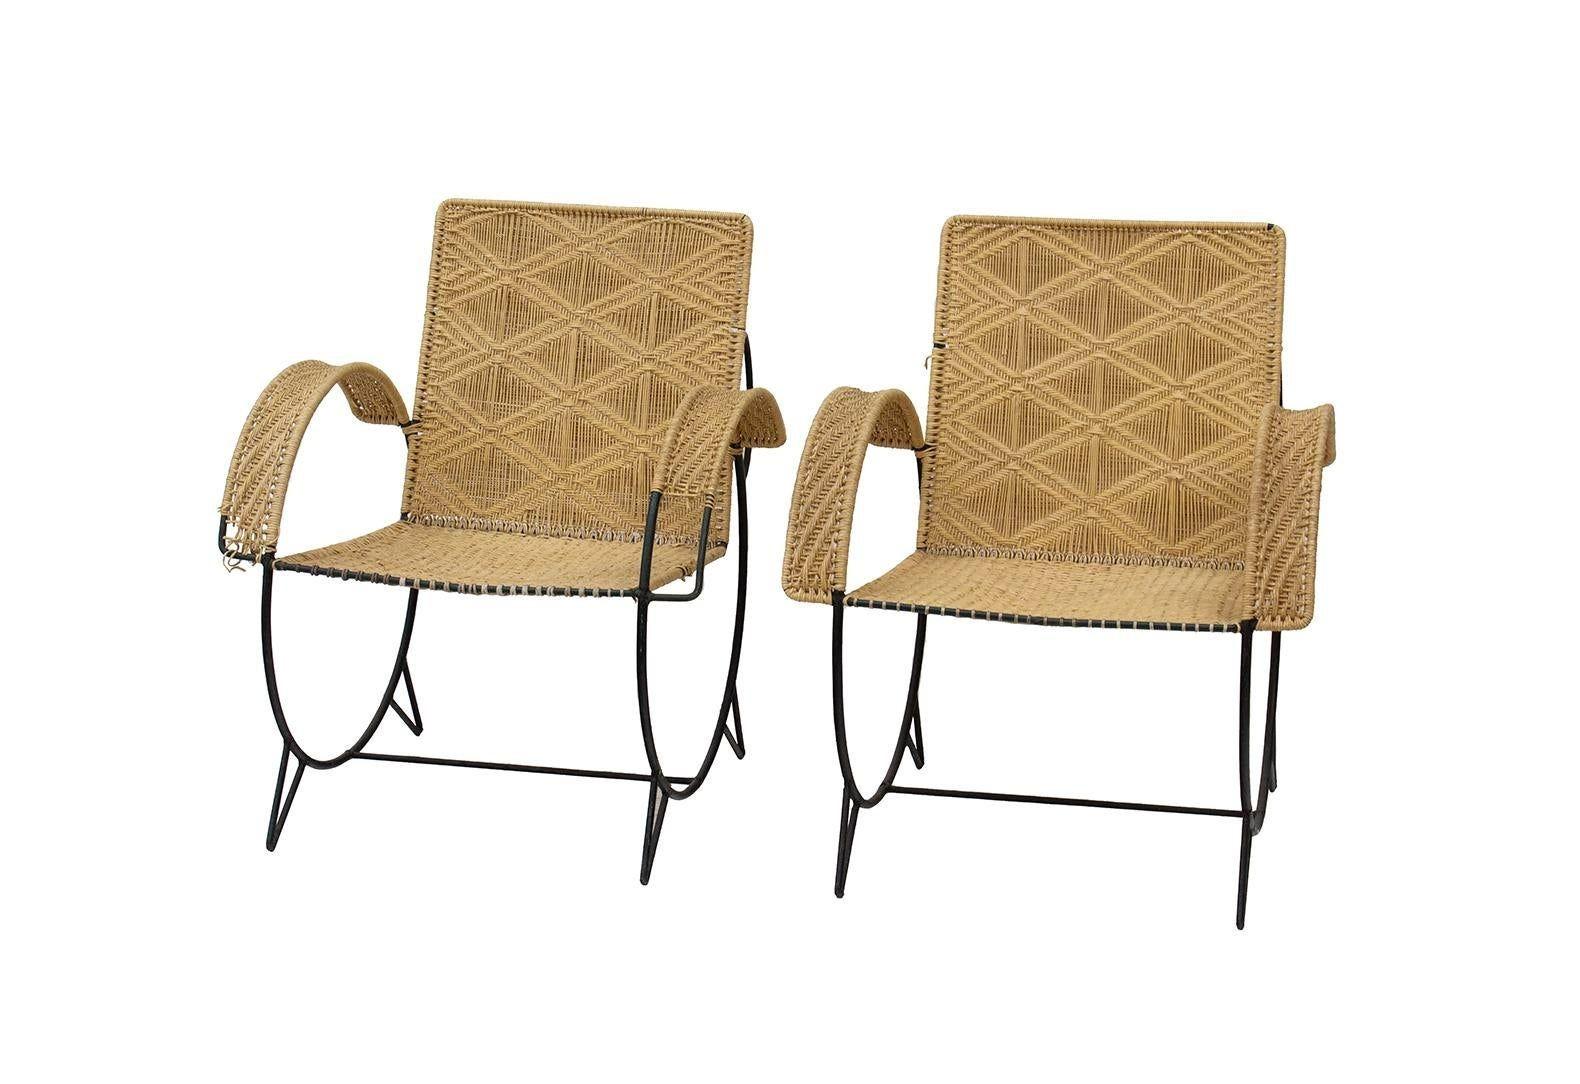 USA, 1950s
Pair of iron hoop chairs with woven seats and backs. Unknown designer, in the style of Van Keppel & Green or Luther Conover. Sculptural form with two circles forming the hoop frame.
Matching round petite coffee table also available in our